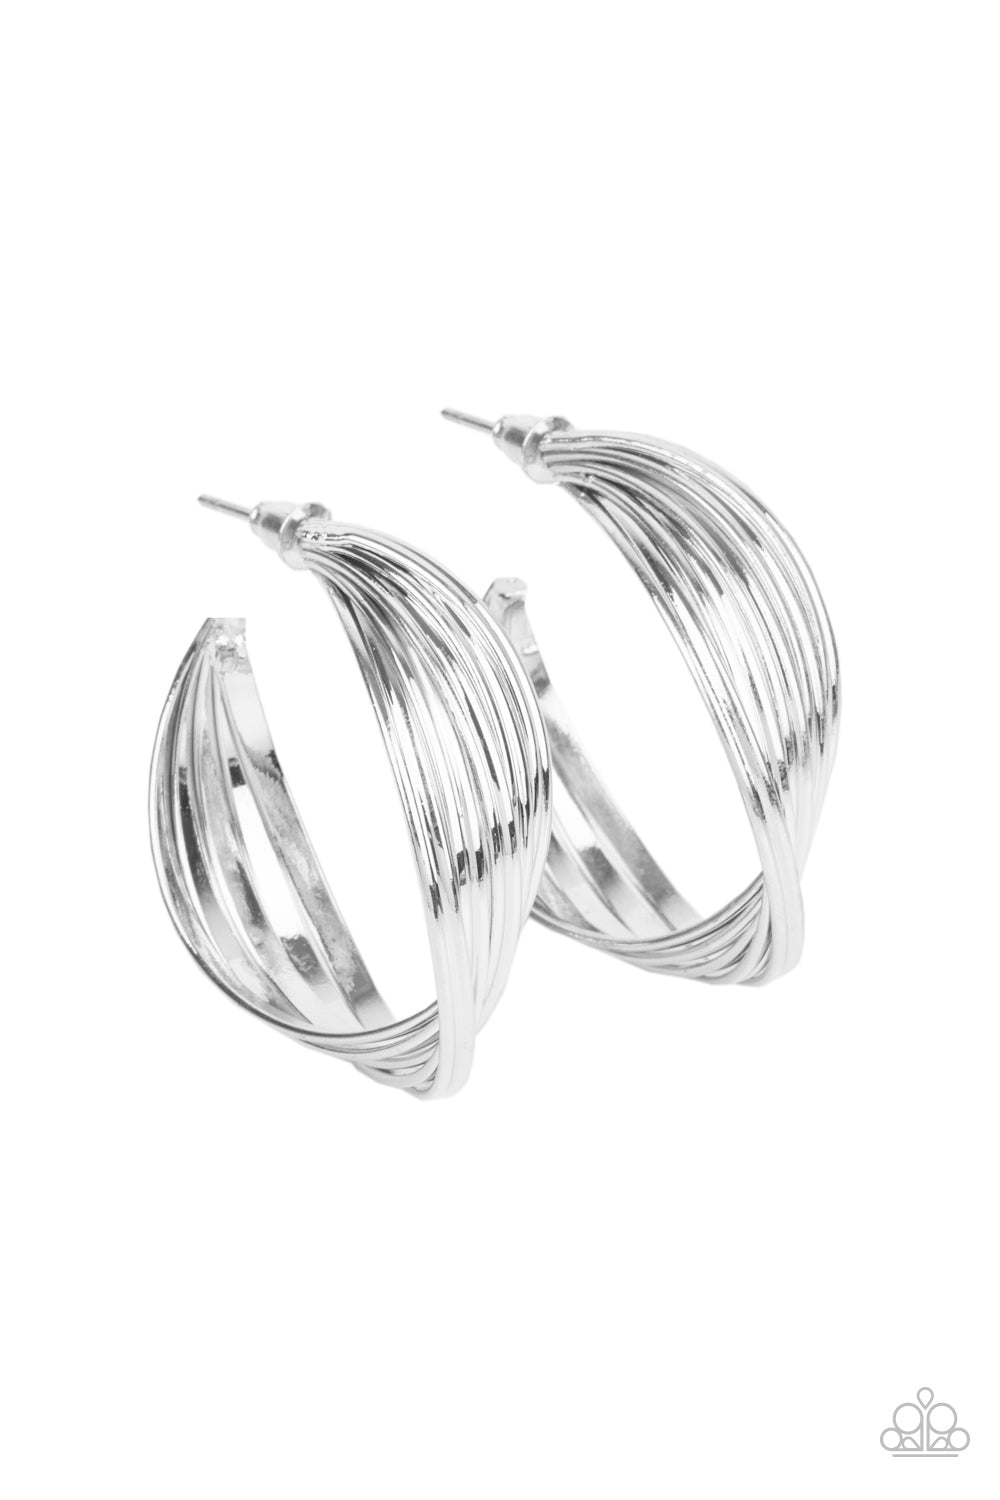 shiny silver hoops delicately twists at the center